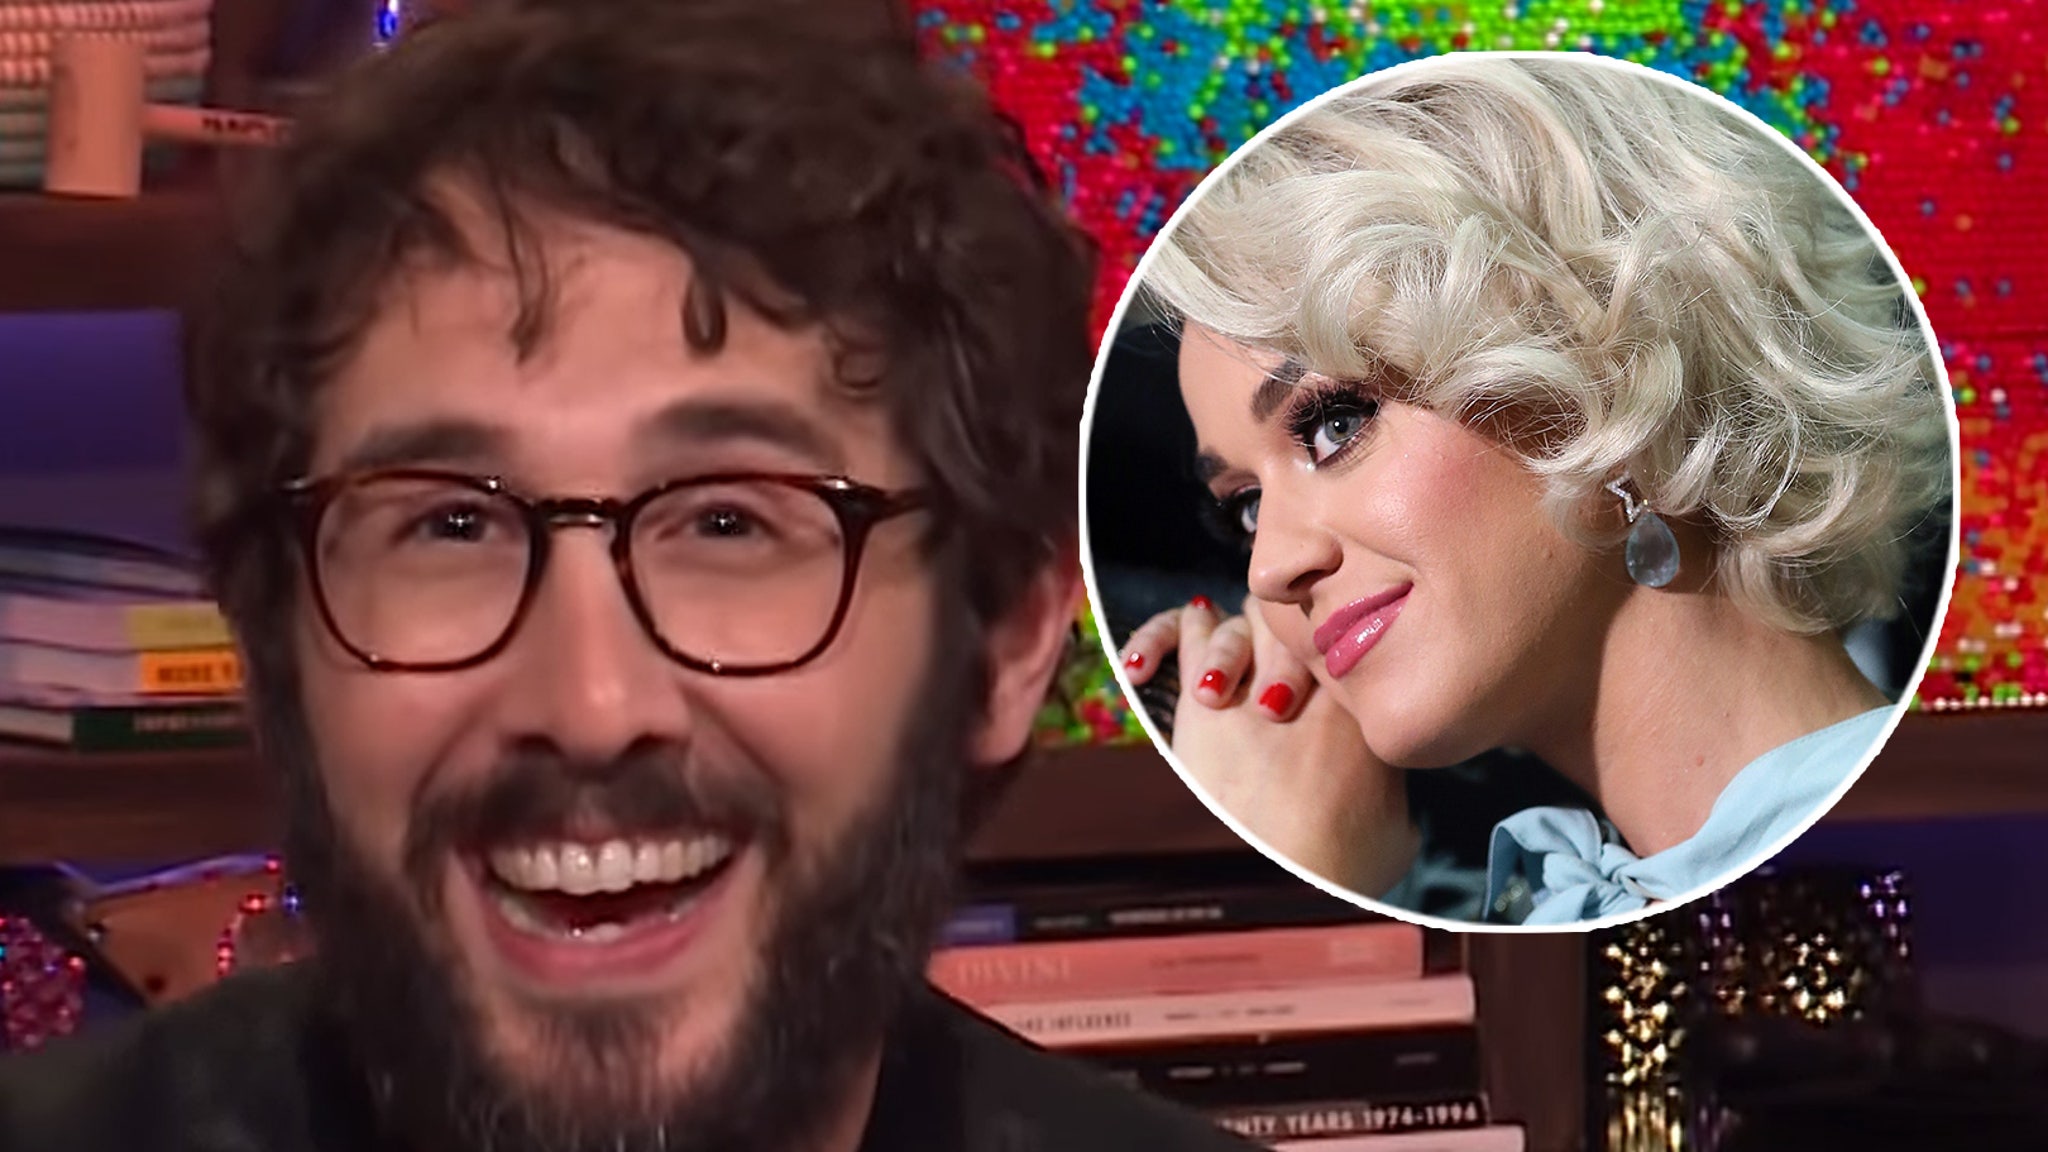 Josh Groban Responds to Katy Perry Revealing He's 'The One That Got Away'